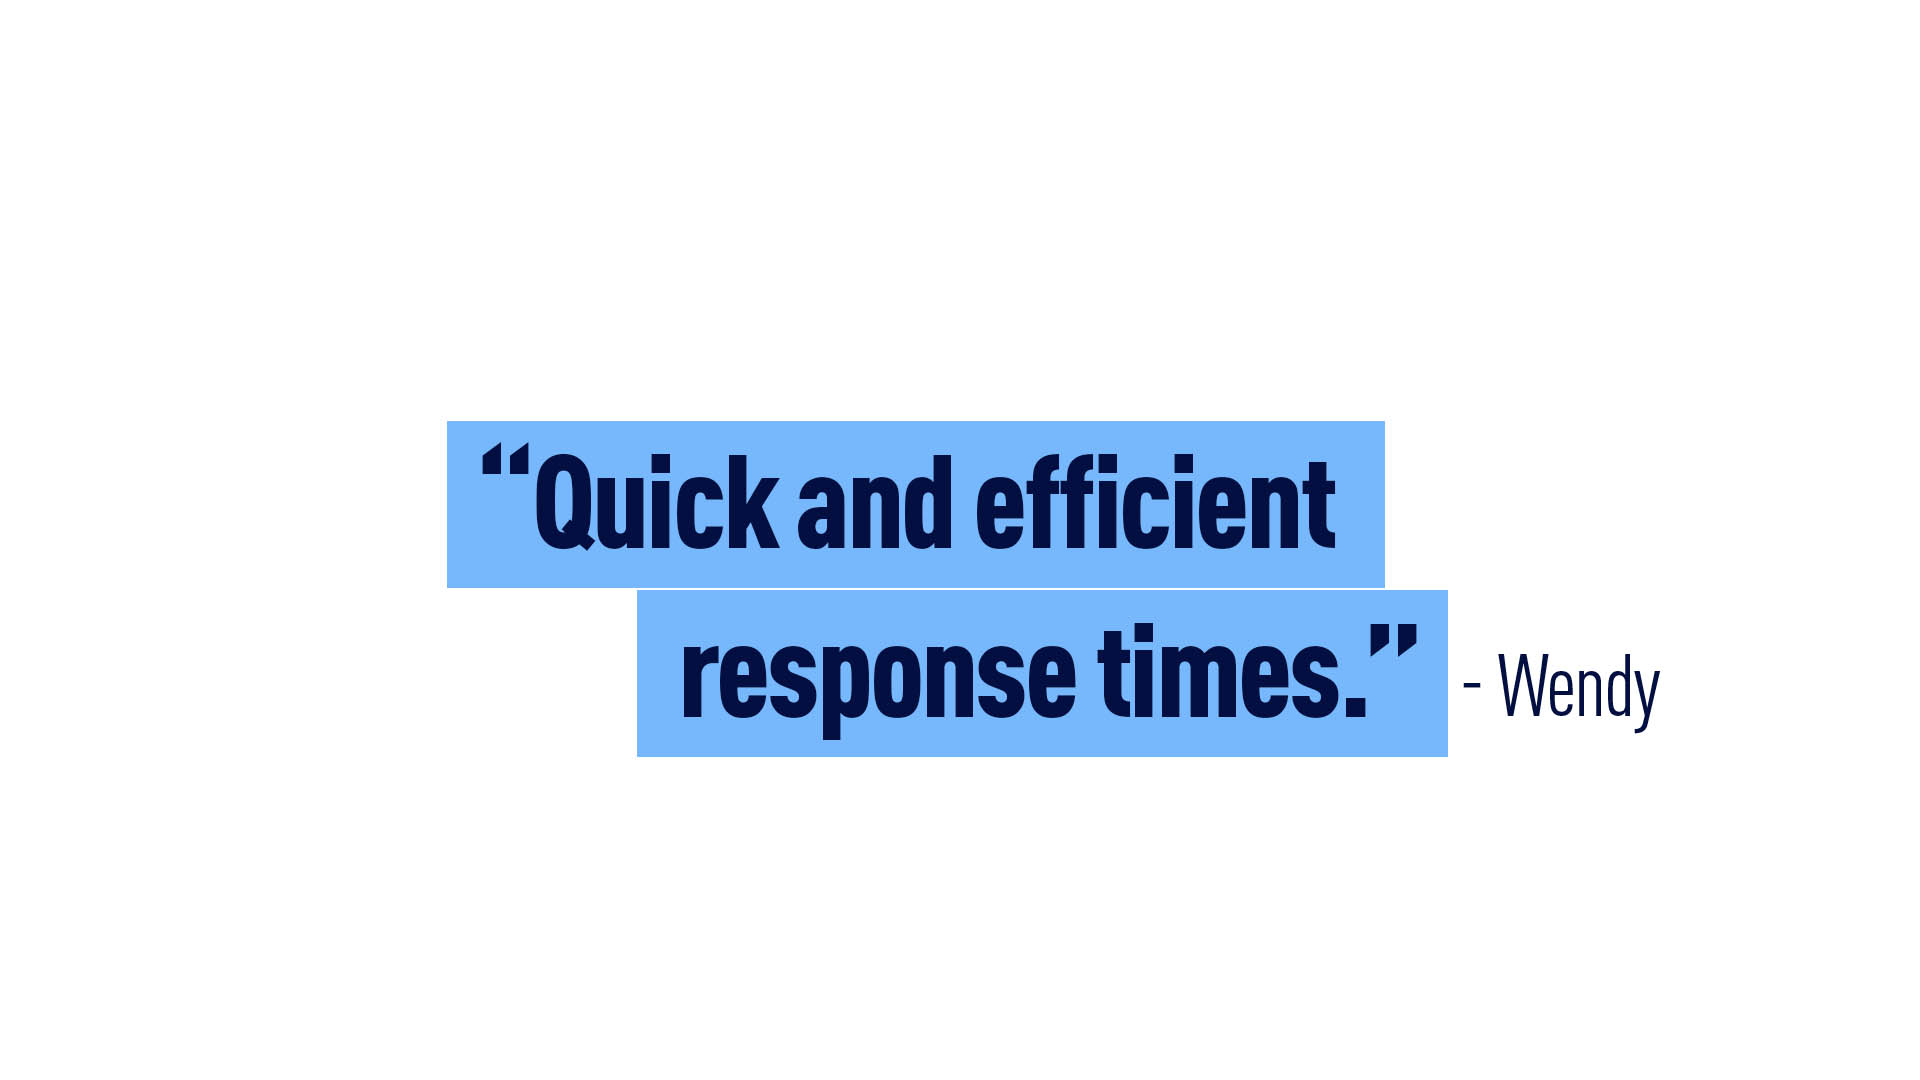 “Quick & efficient response times.” - Wendy